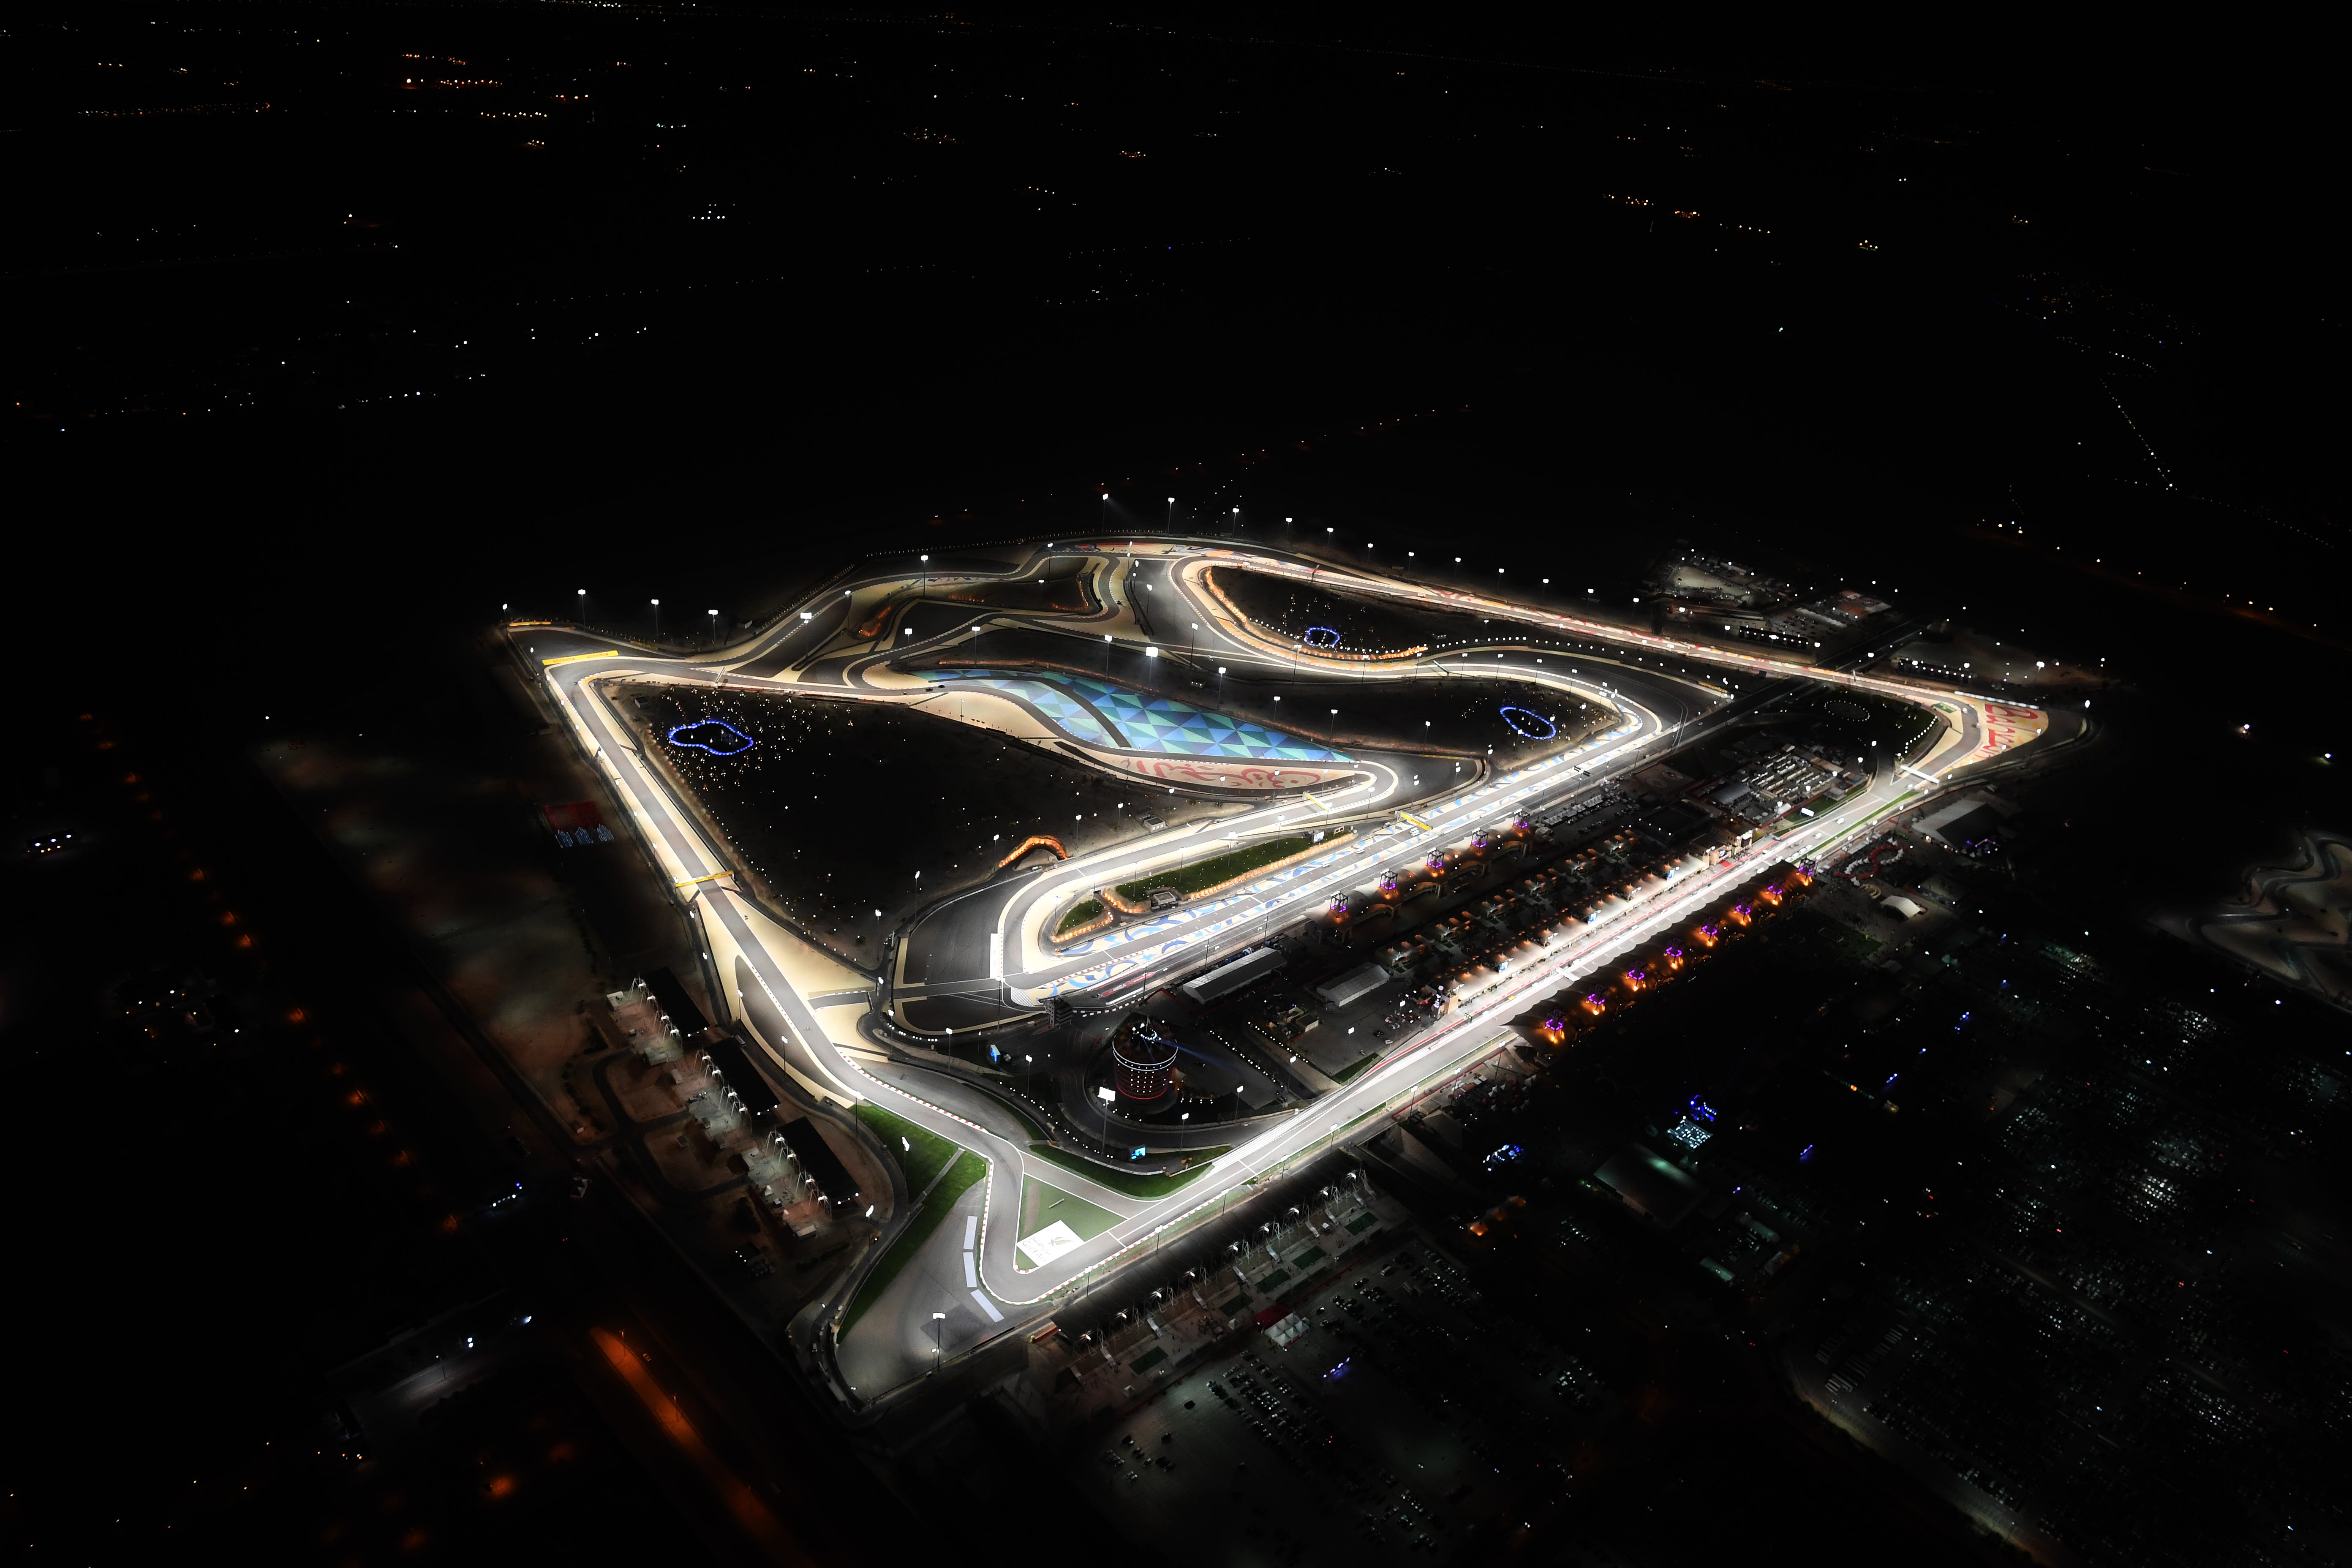 The Bahrain International Circuit illuminated at night by its floodlights